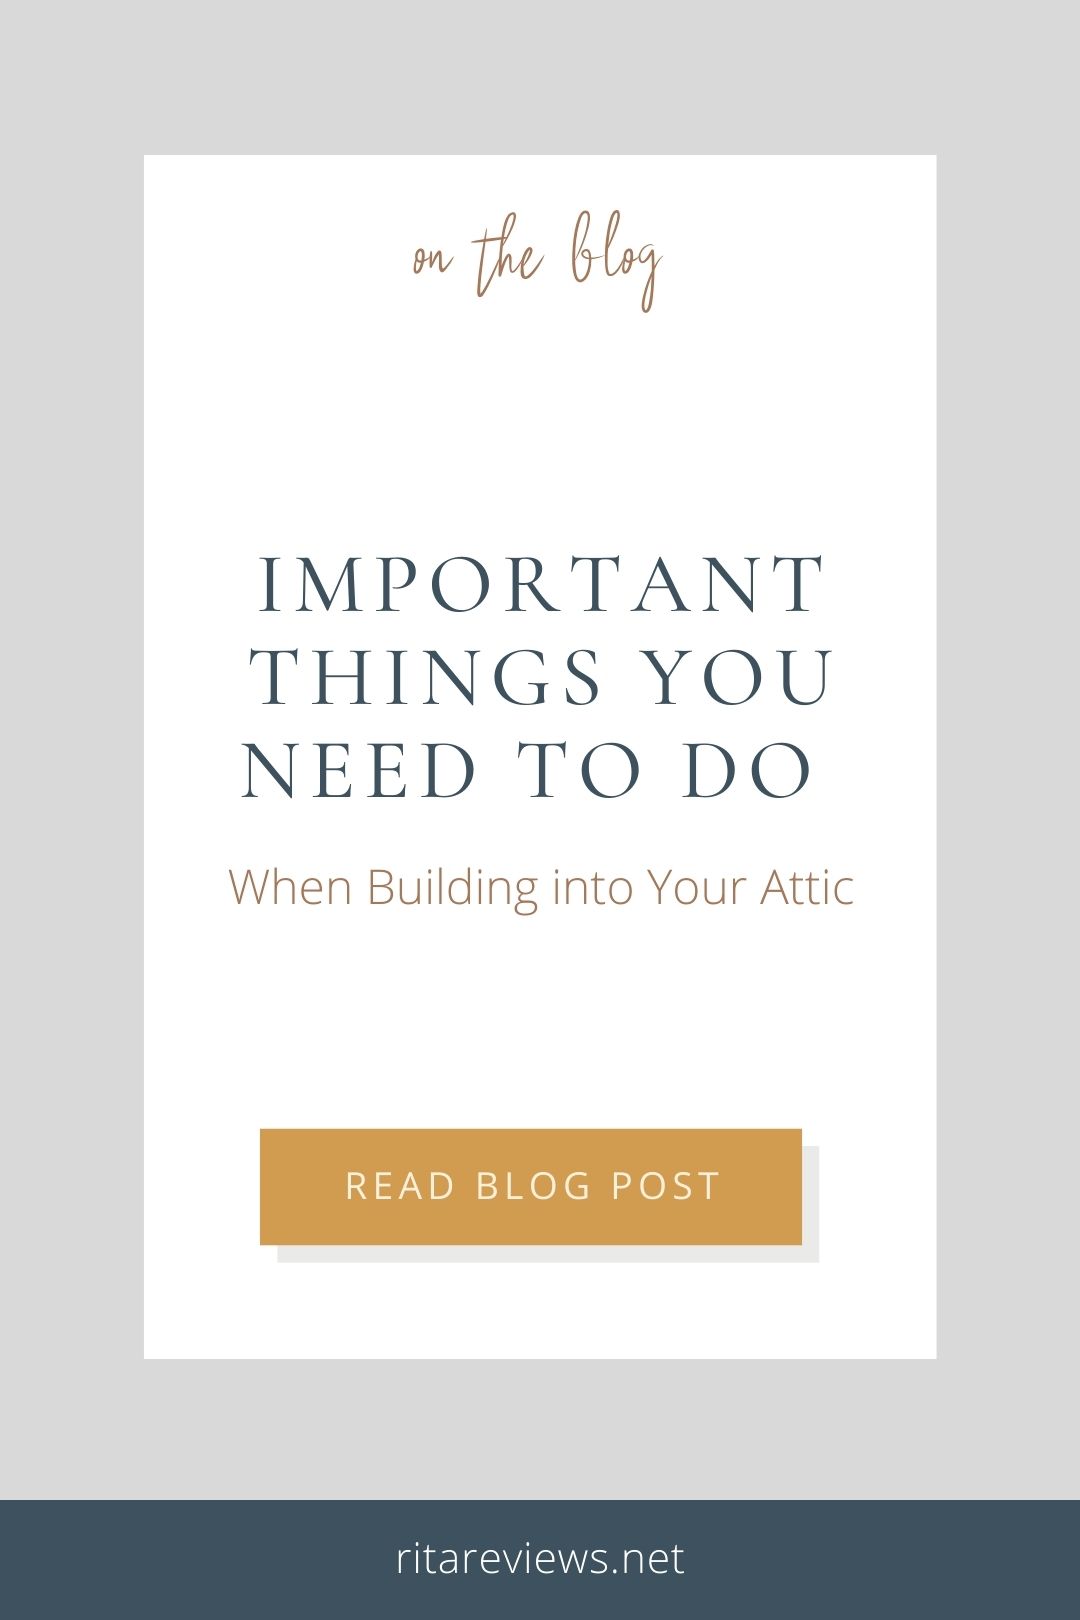 Important Things You Need to Do When Building Into your Attic